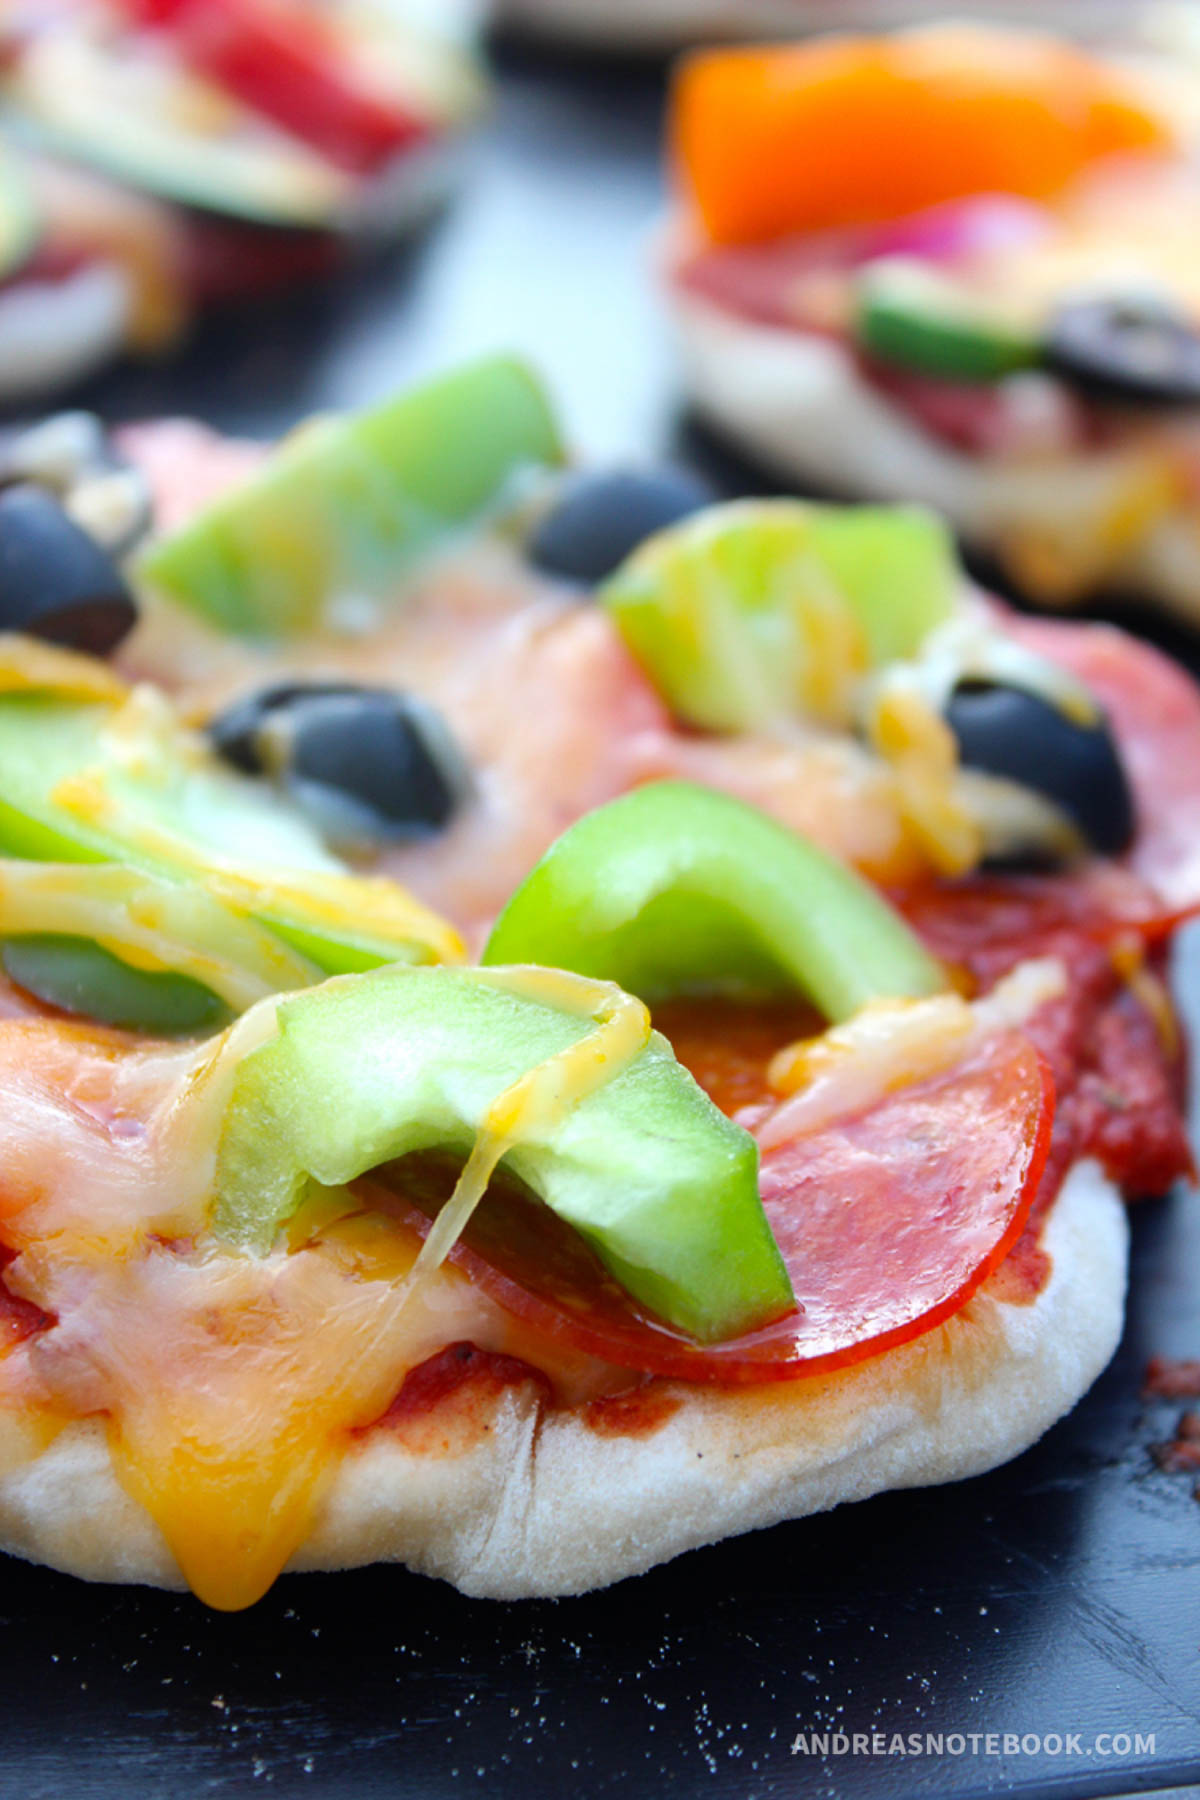 Pizza with green peppers and pepperoni.